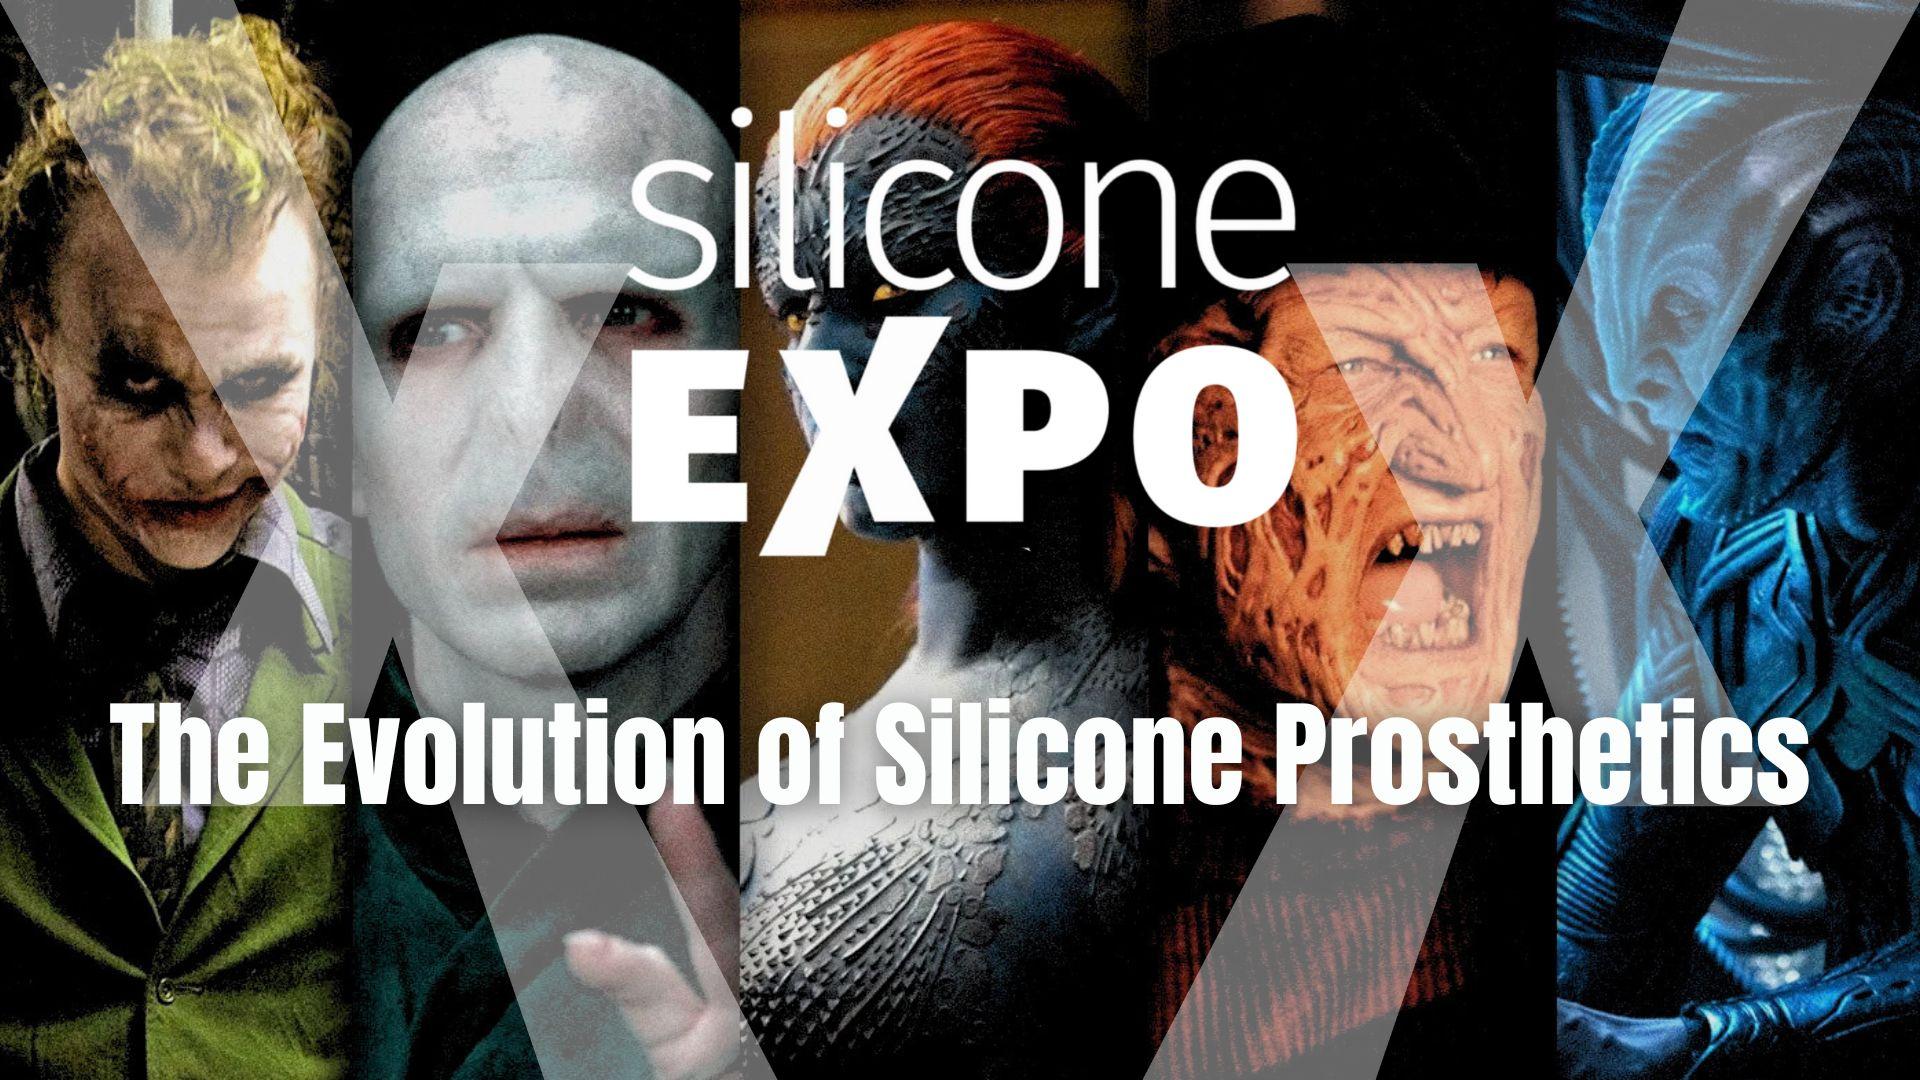 From Fantasy to Functionality: The Silicone Prosthetics Evolution